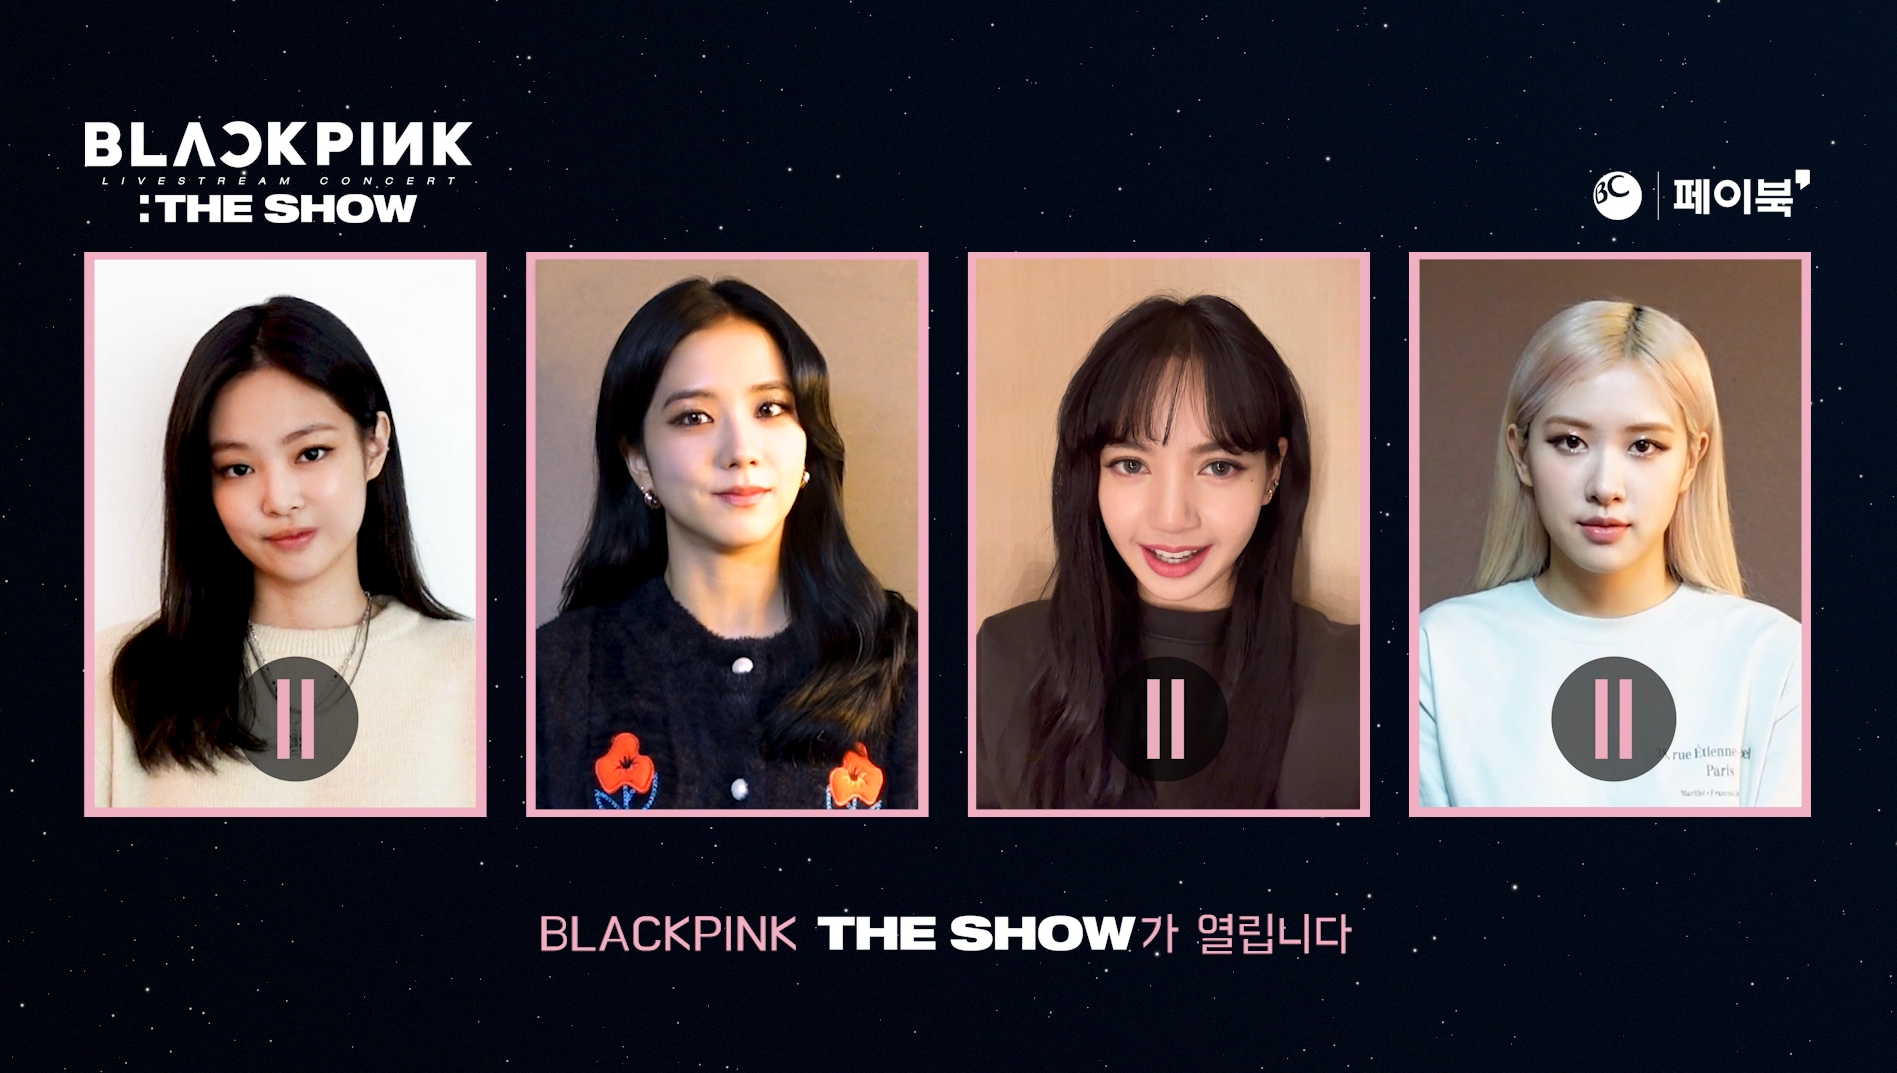 BLACKPINK - 'THE SHOW' MESSAGE VIDEO